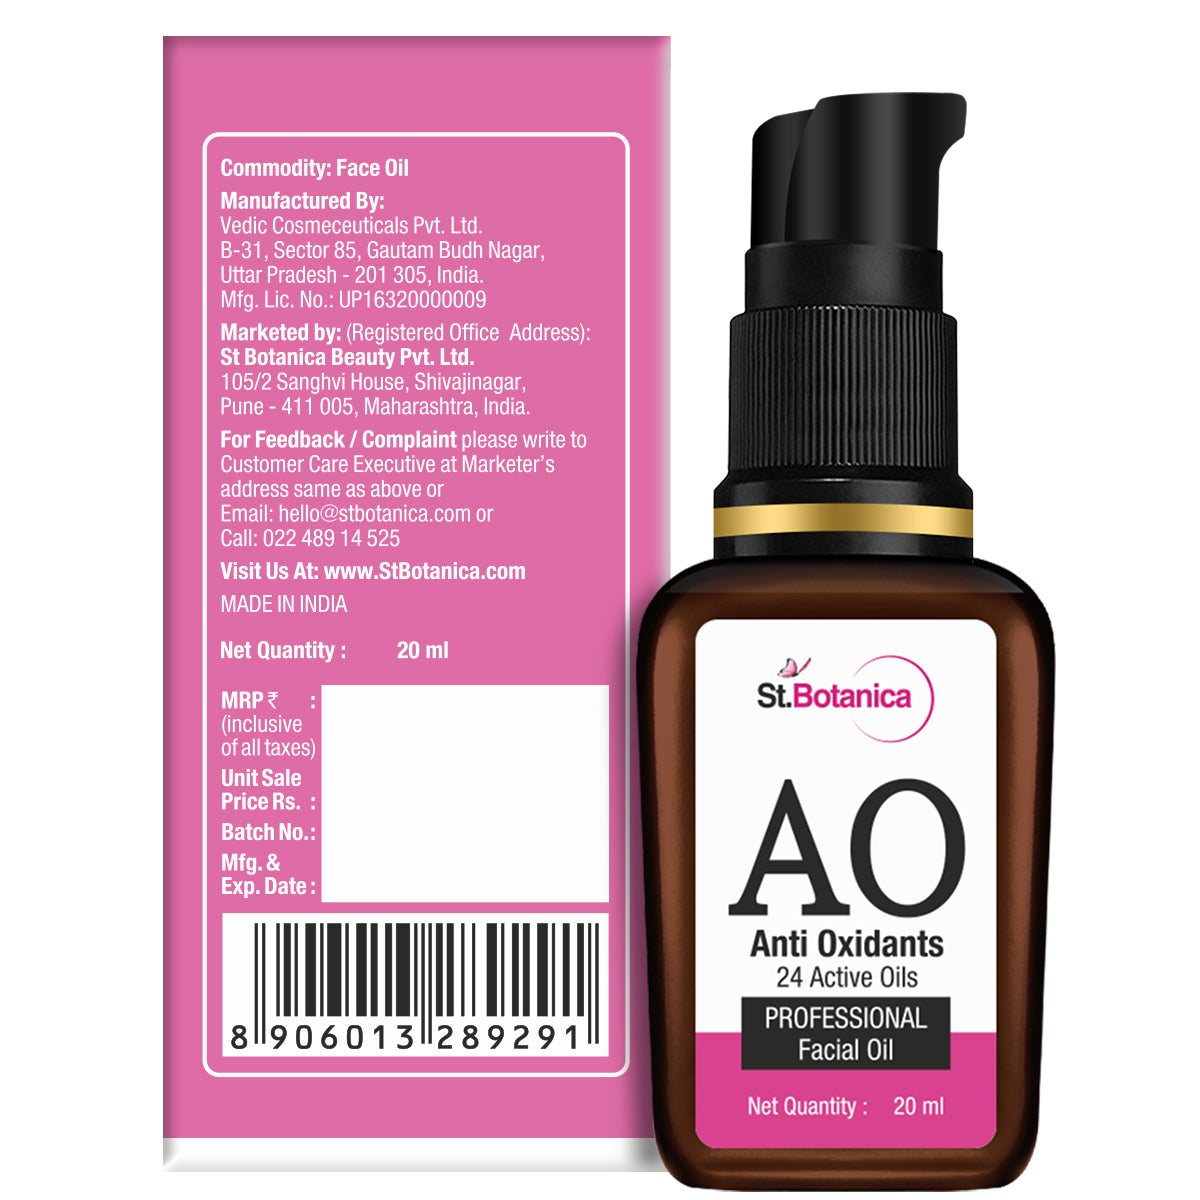 St.Botanica Anti Oxidant (24 Active Oils) Professional Face Oil - For Complete Skin Care, 20 ml